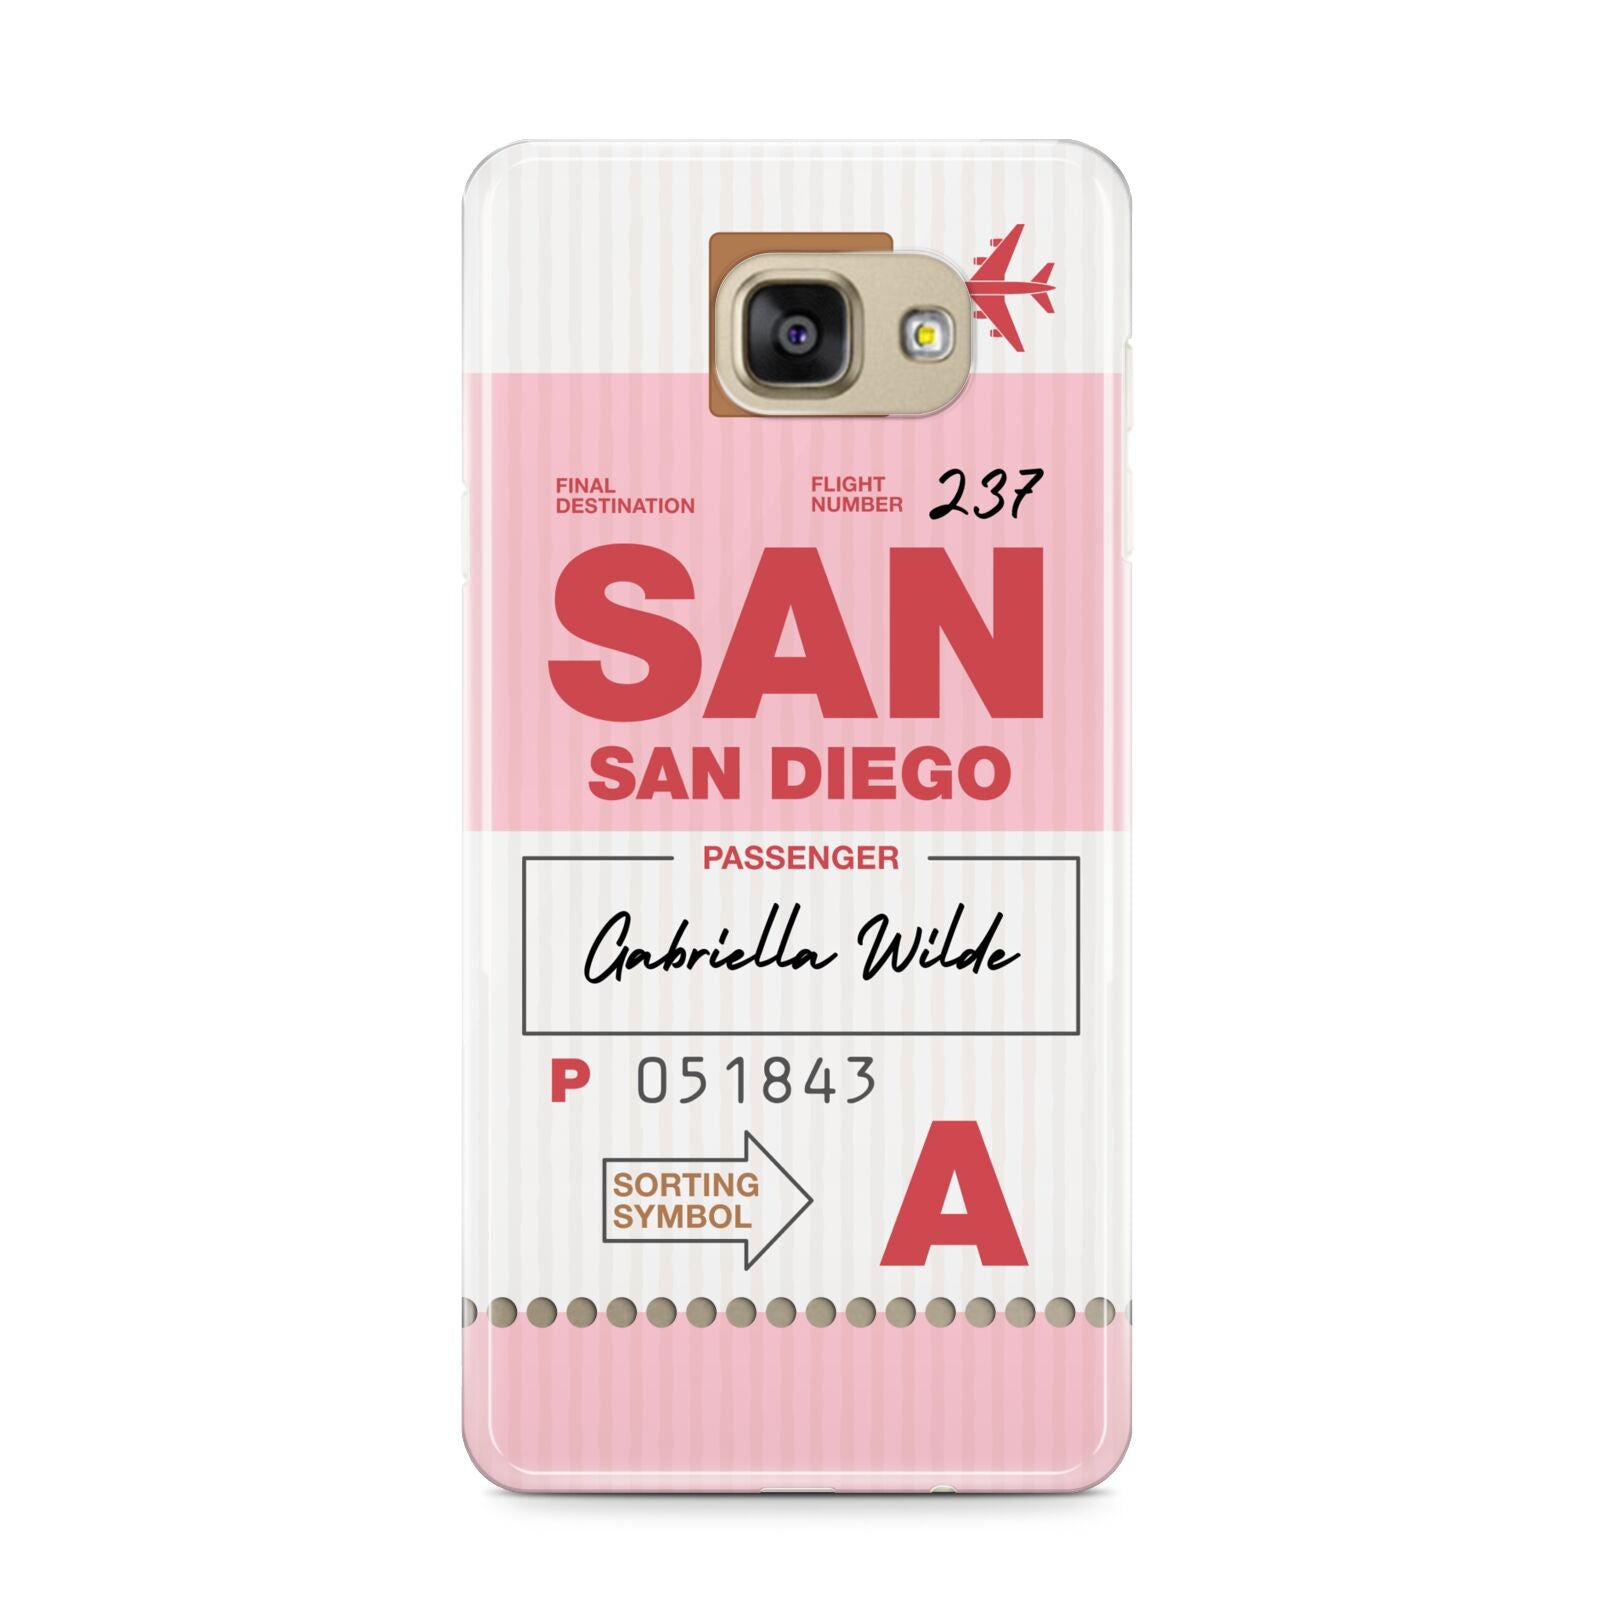 Personalised Vintage Luggage Tag Samsung Galaxy A9 2016 Case on gold phone